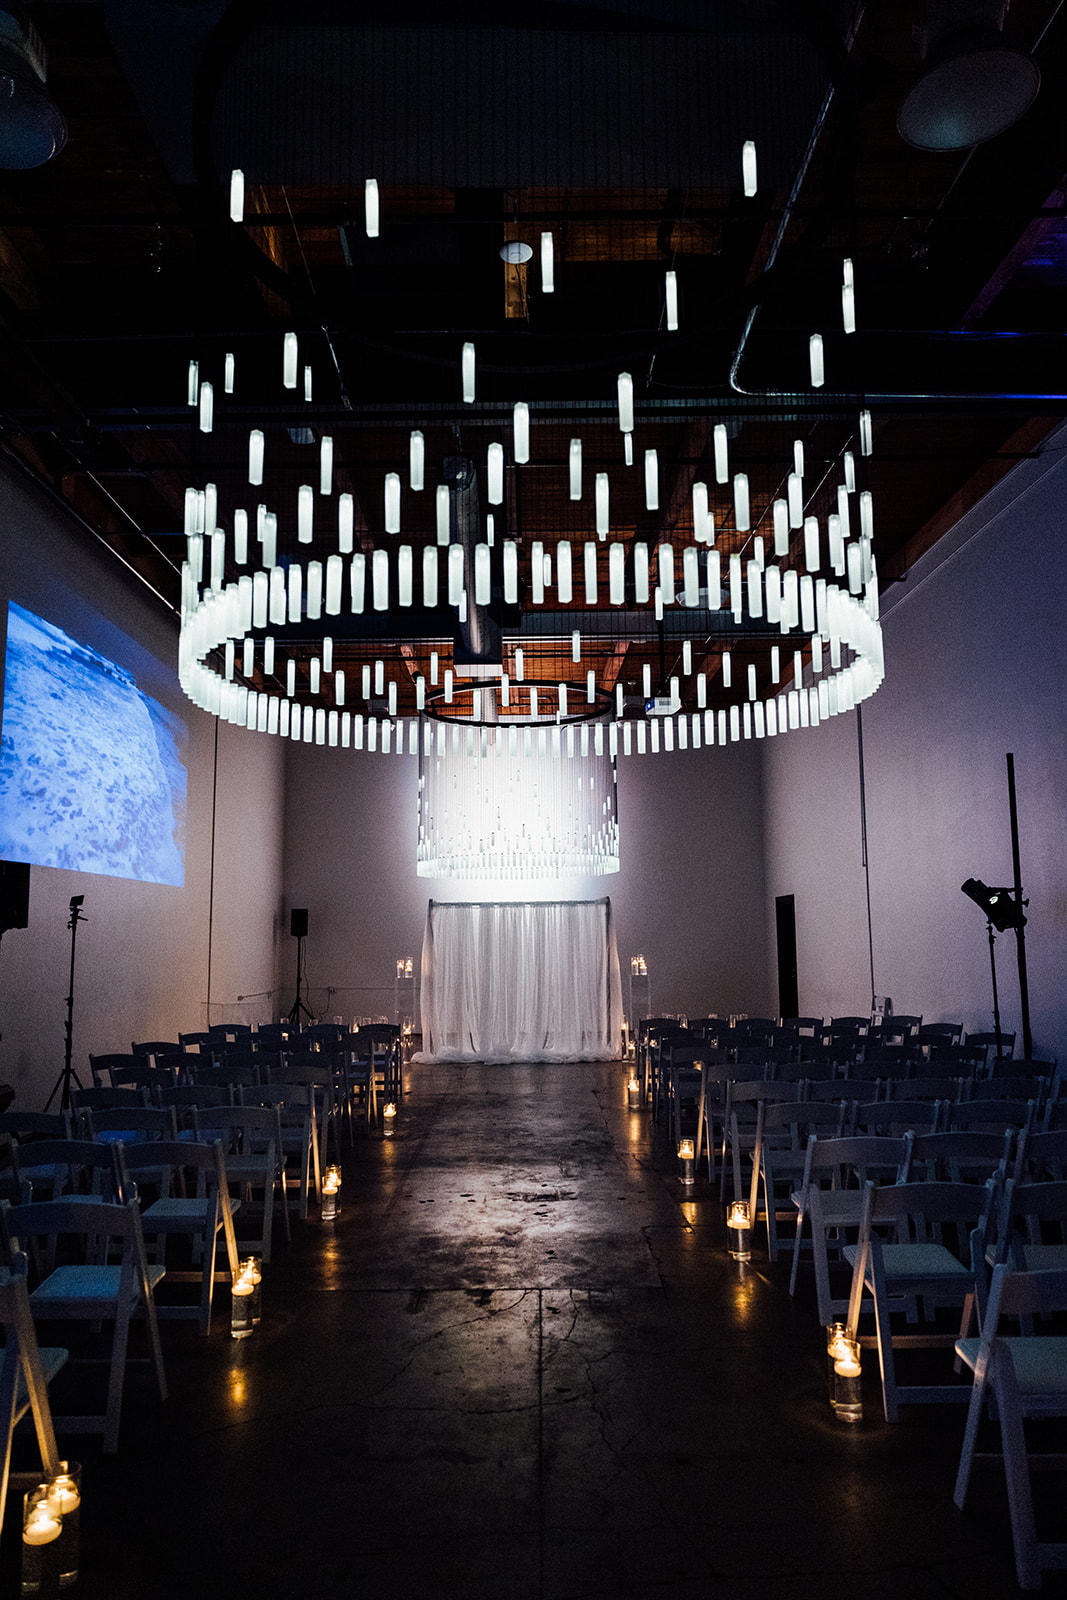 Canvas Event Space Wedding